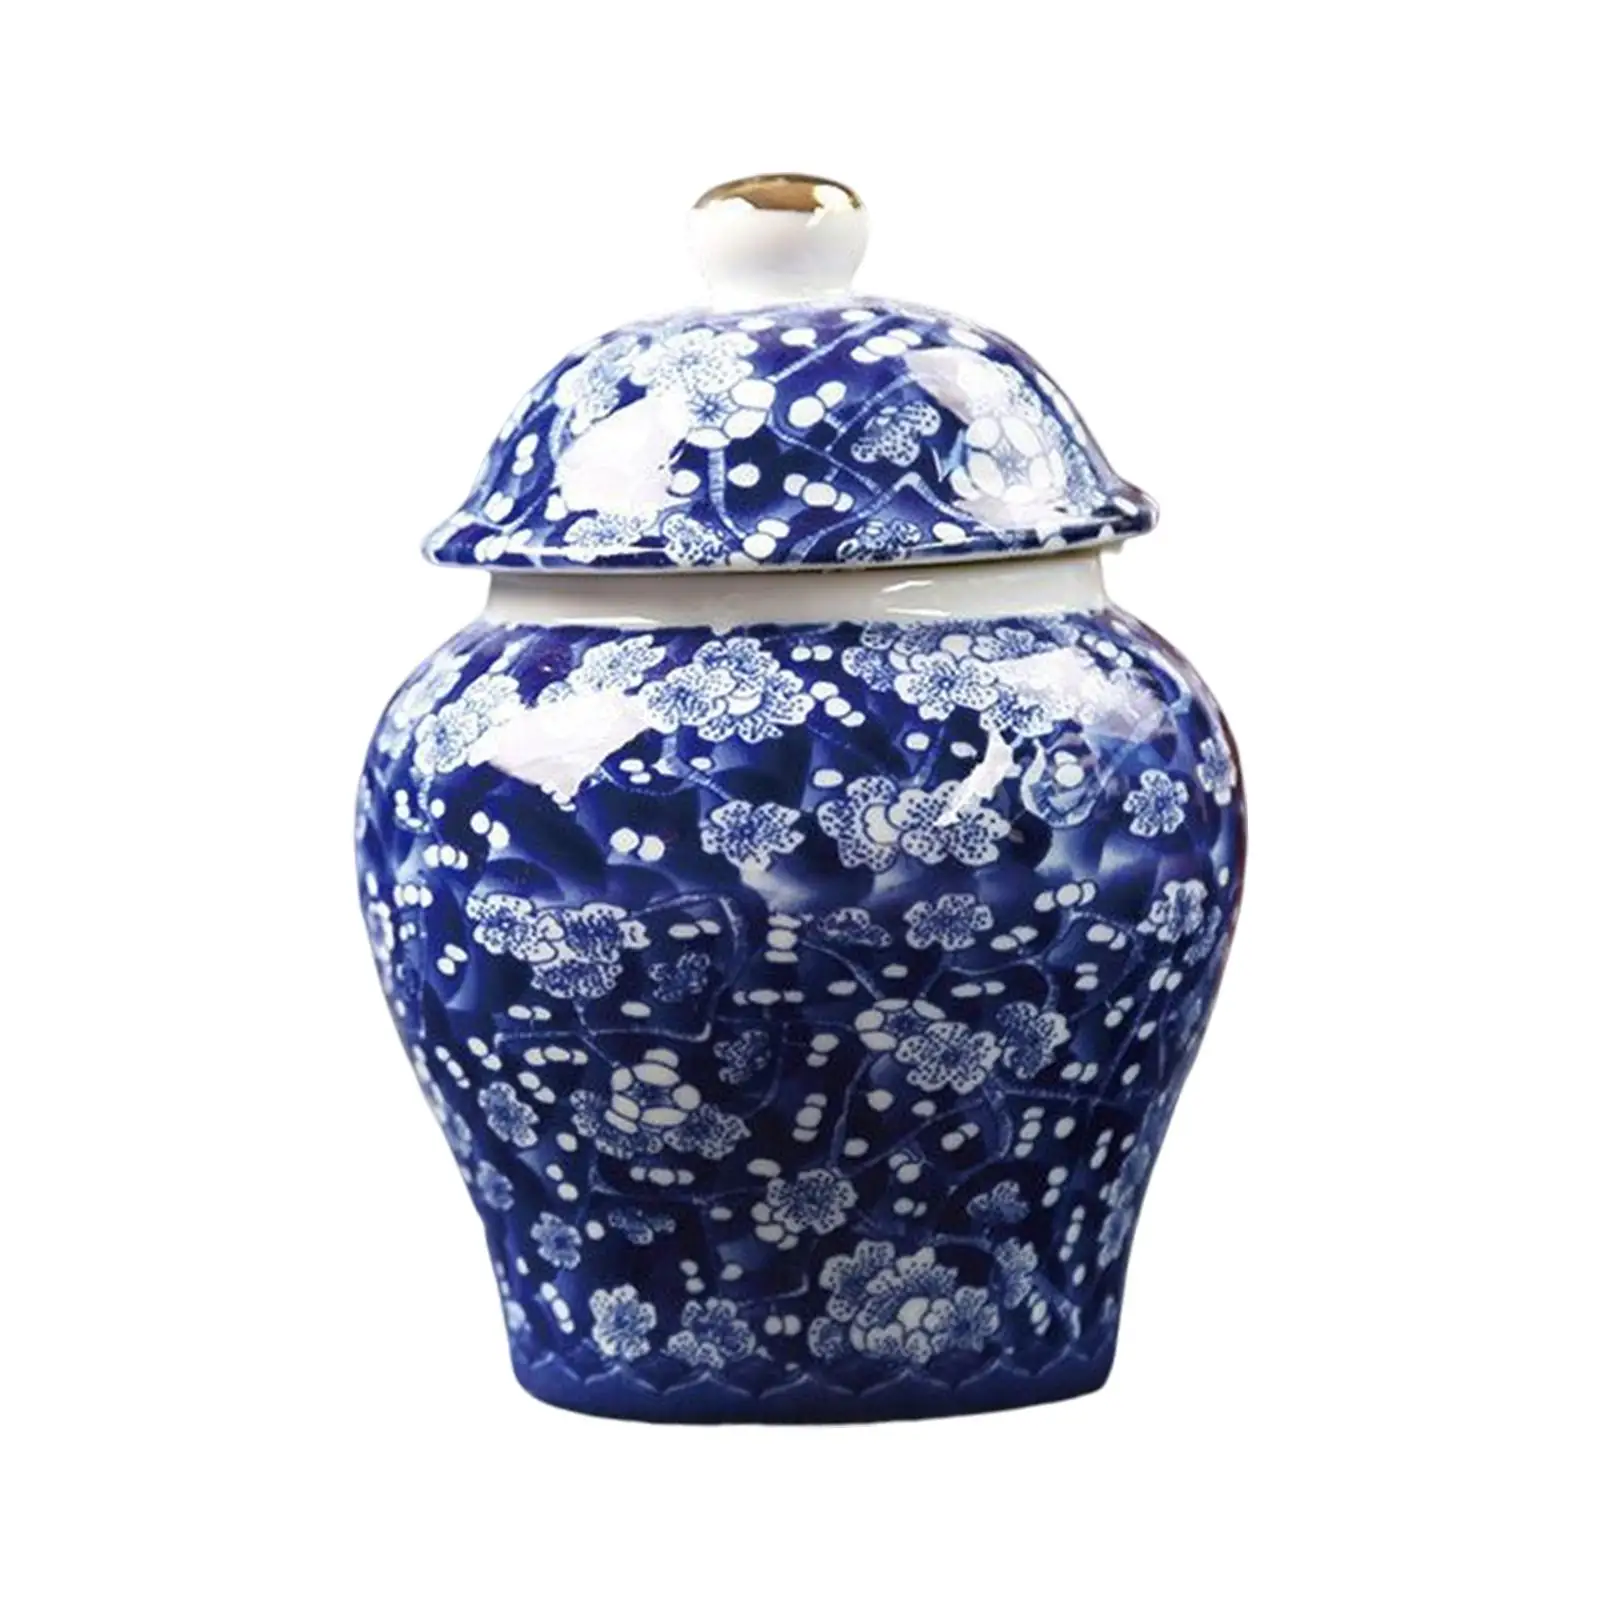 Blue and White Porcelain Ginger Jar Food Storage Container Bud Vase with Lid